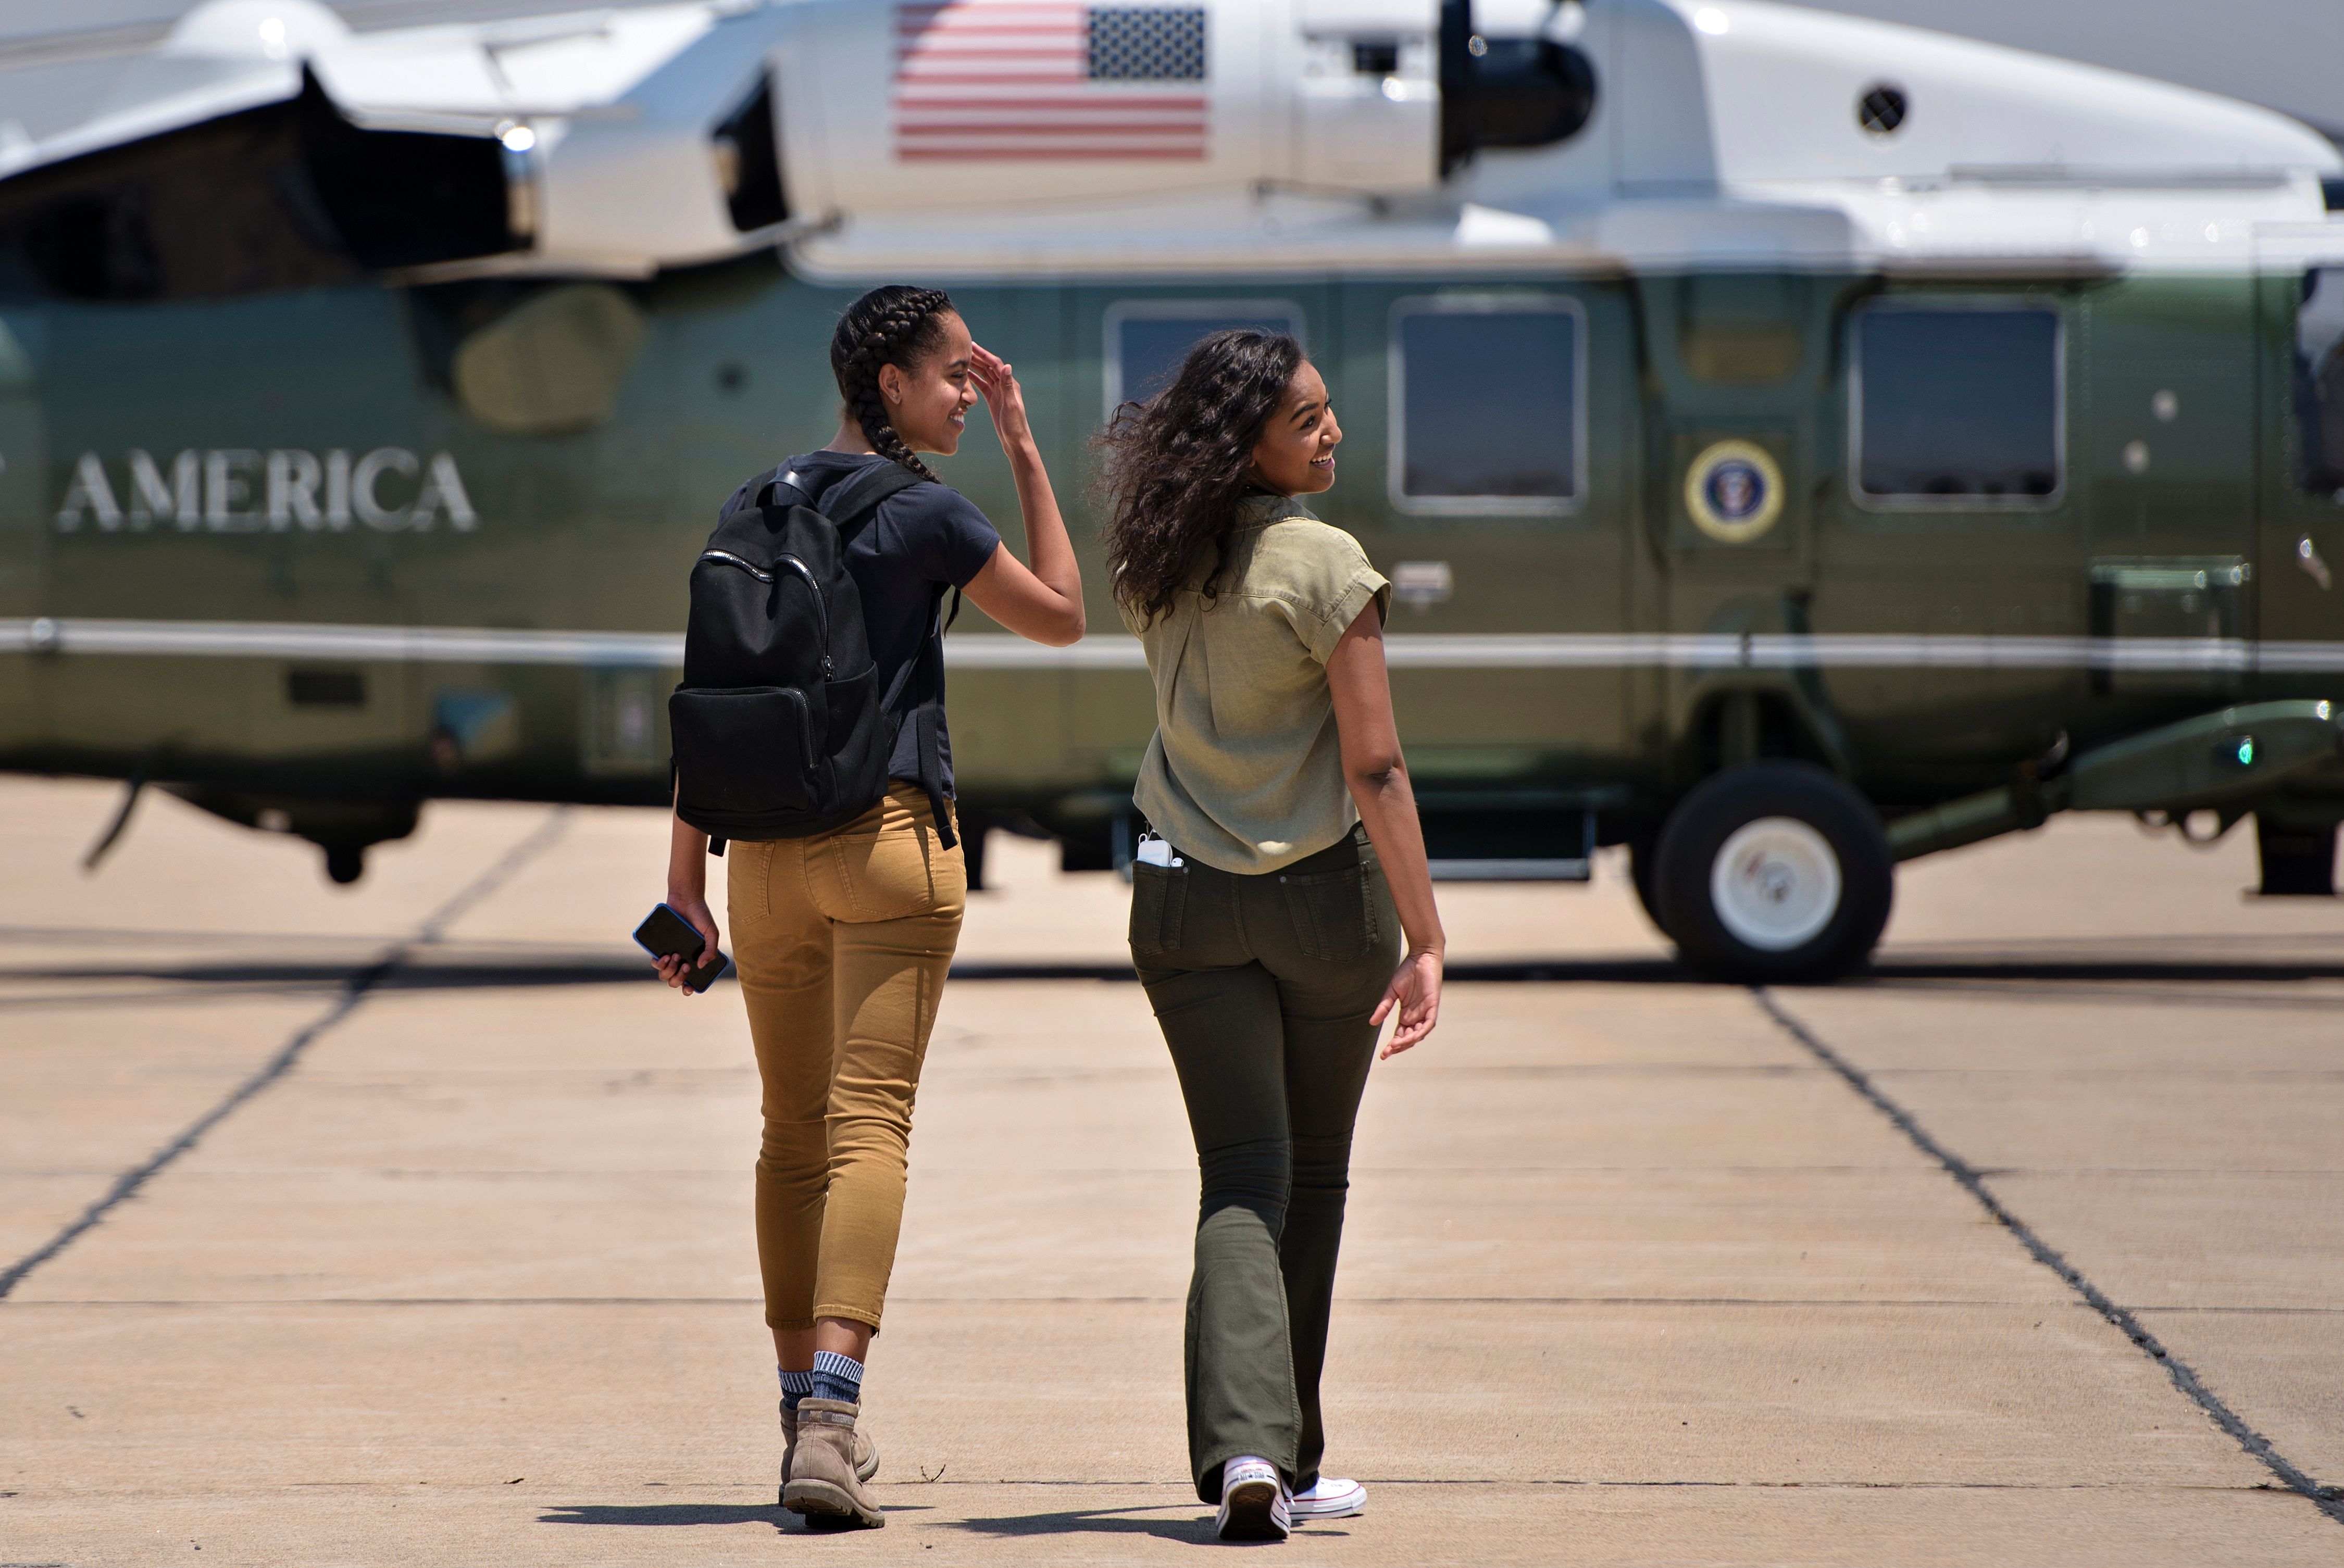 Malia and Sasha walk to a helicopter while looking back at their parents at Roswell International Air Center in Roswell, New Mexico, on June 17, 2016.